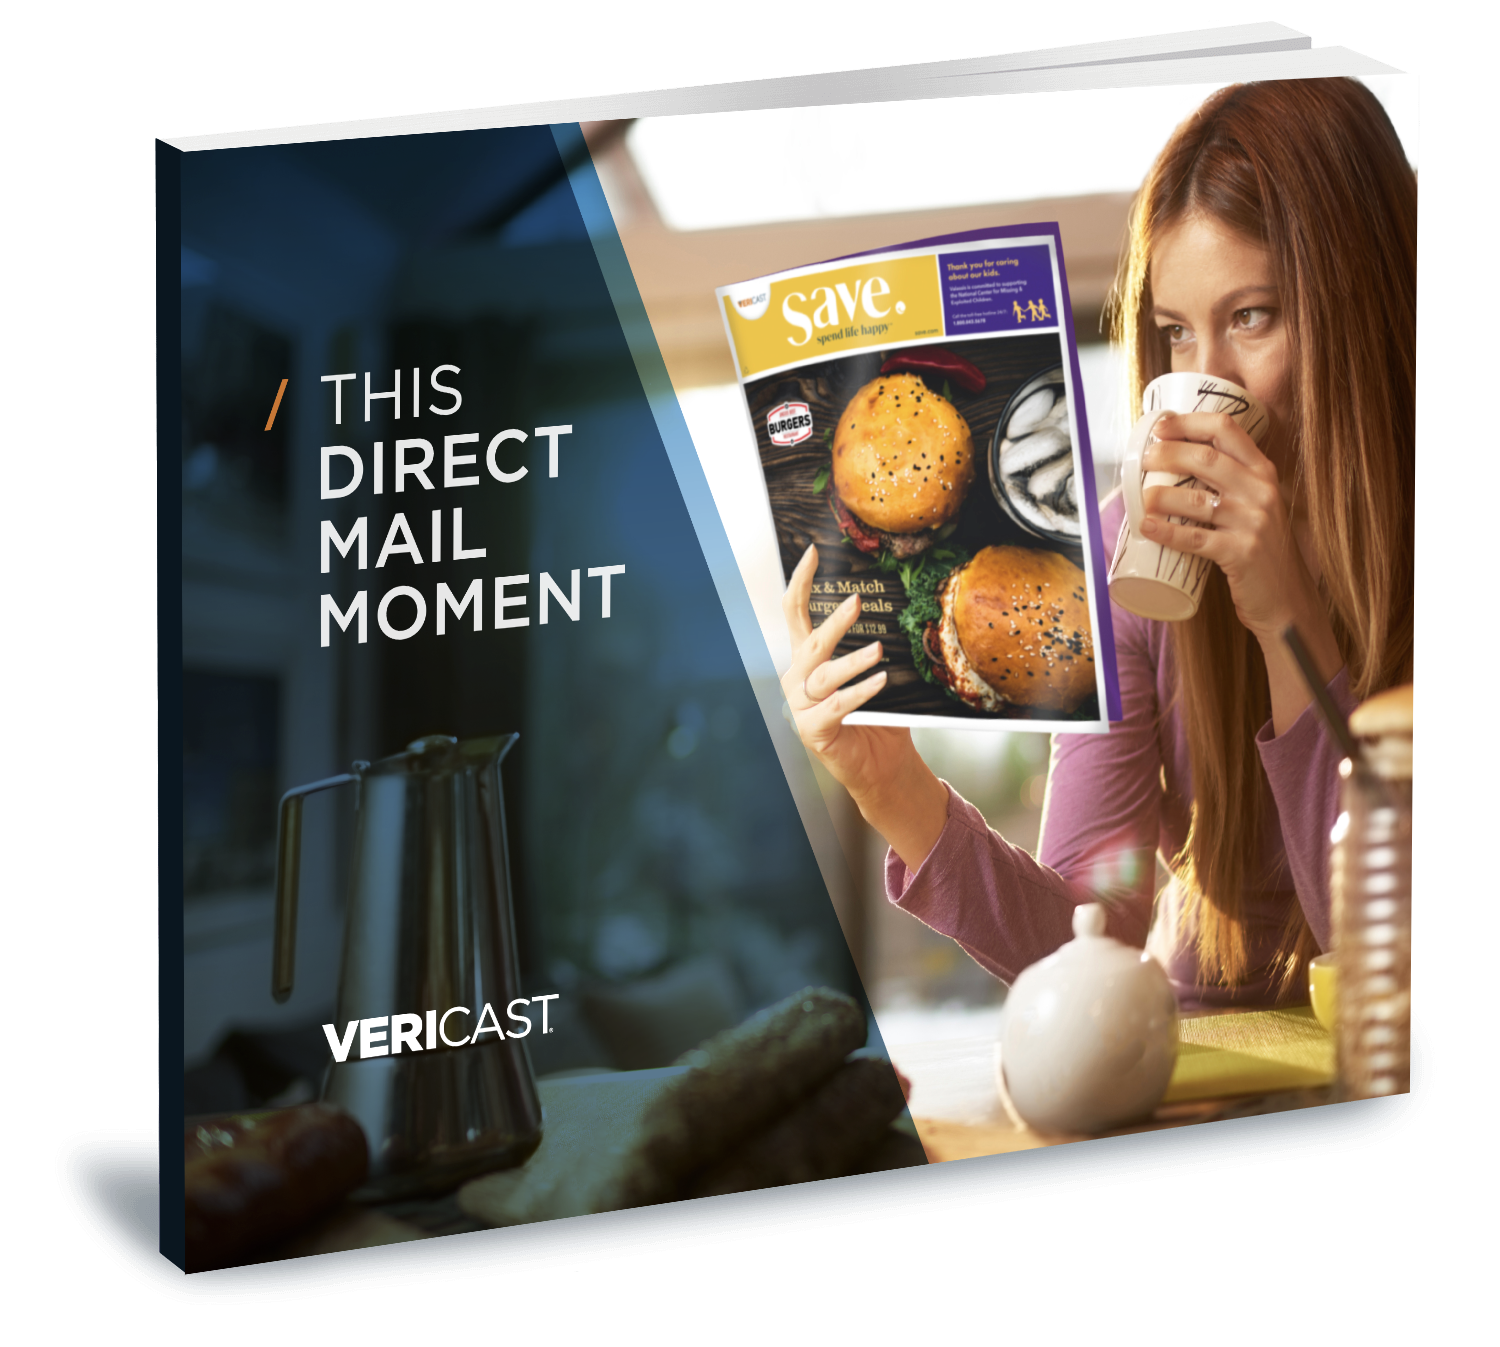 The Direct Mail Moment